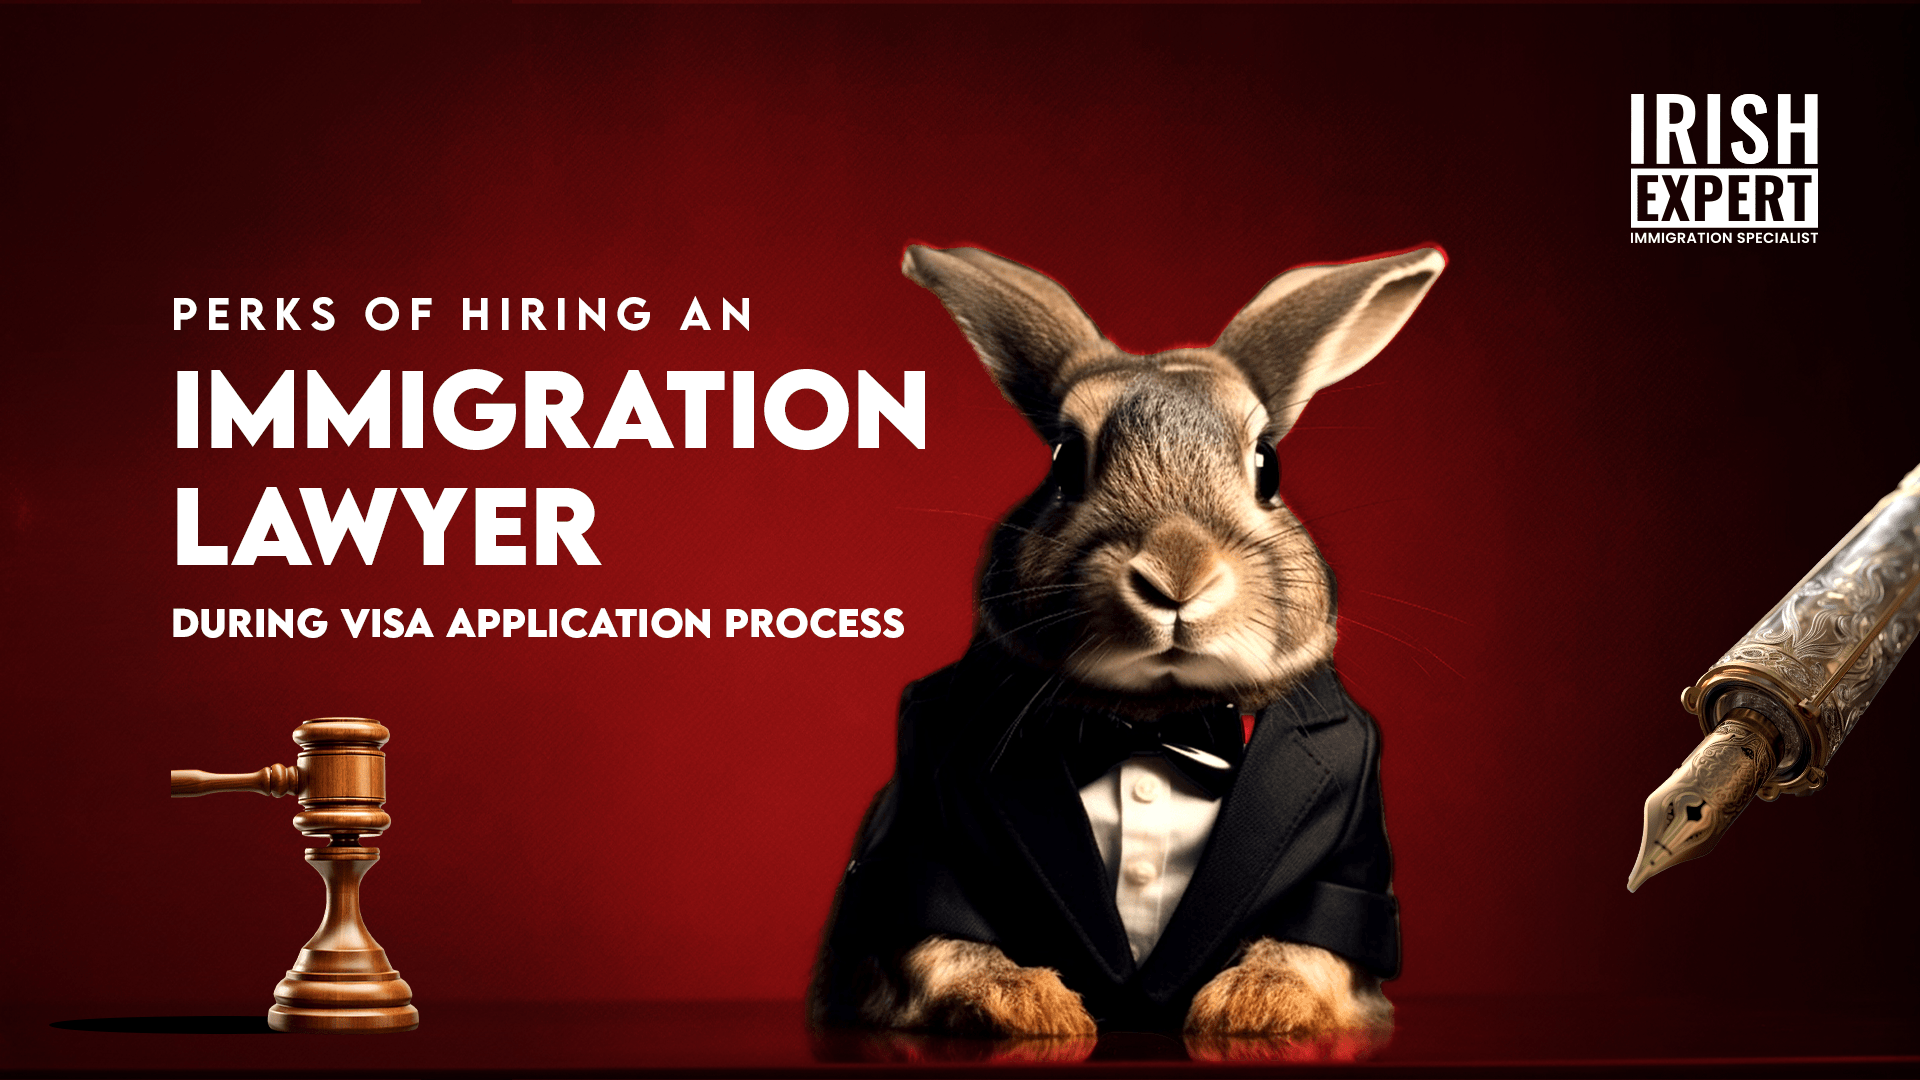 Perks of hiring an Immigration Lawyer during visa application process